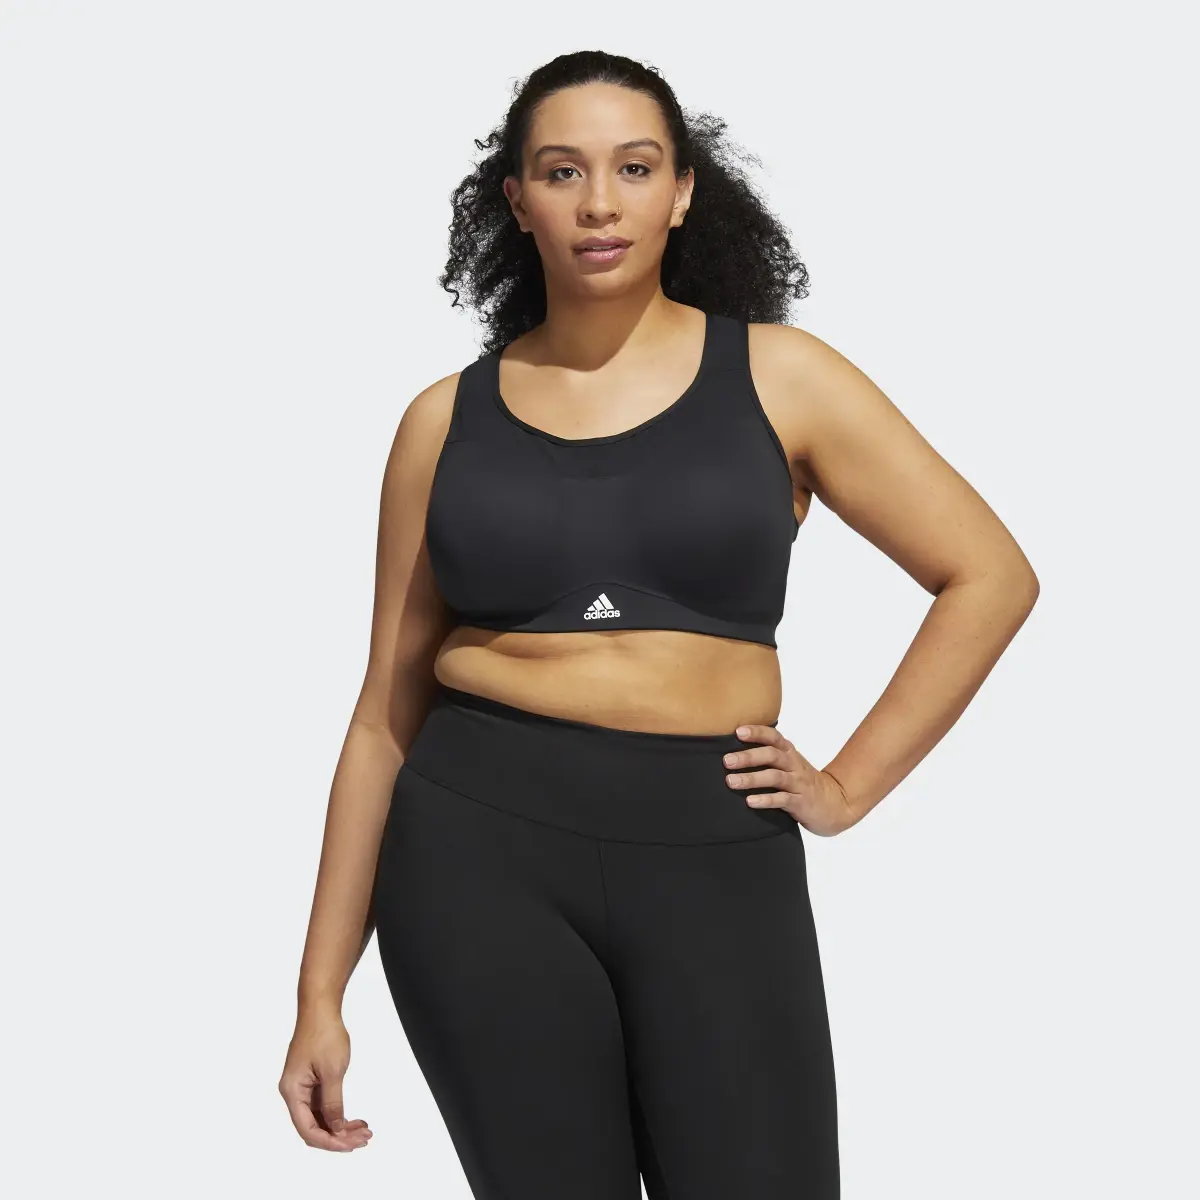 Adidas Brassière de training Maintien fort adidas TLRD Impact (Grandes tailles). 2